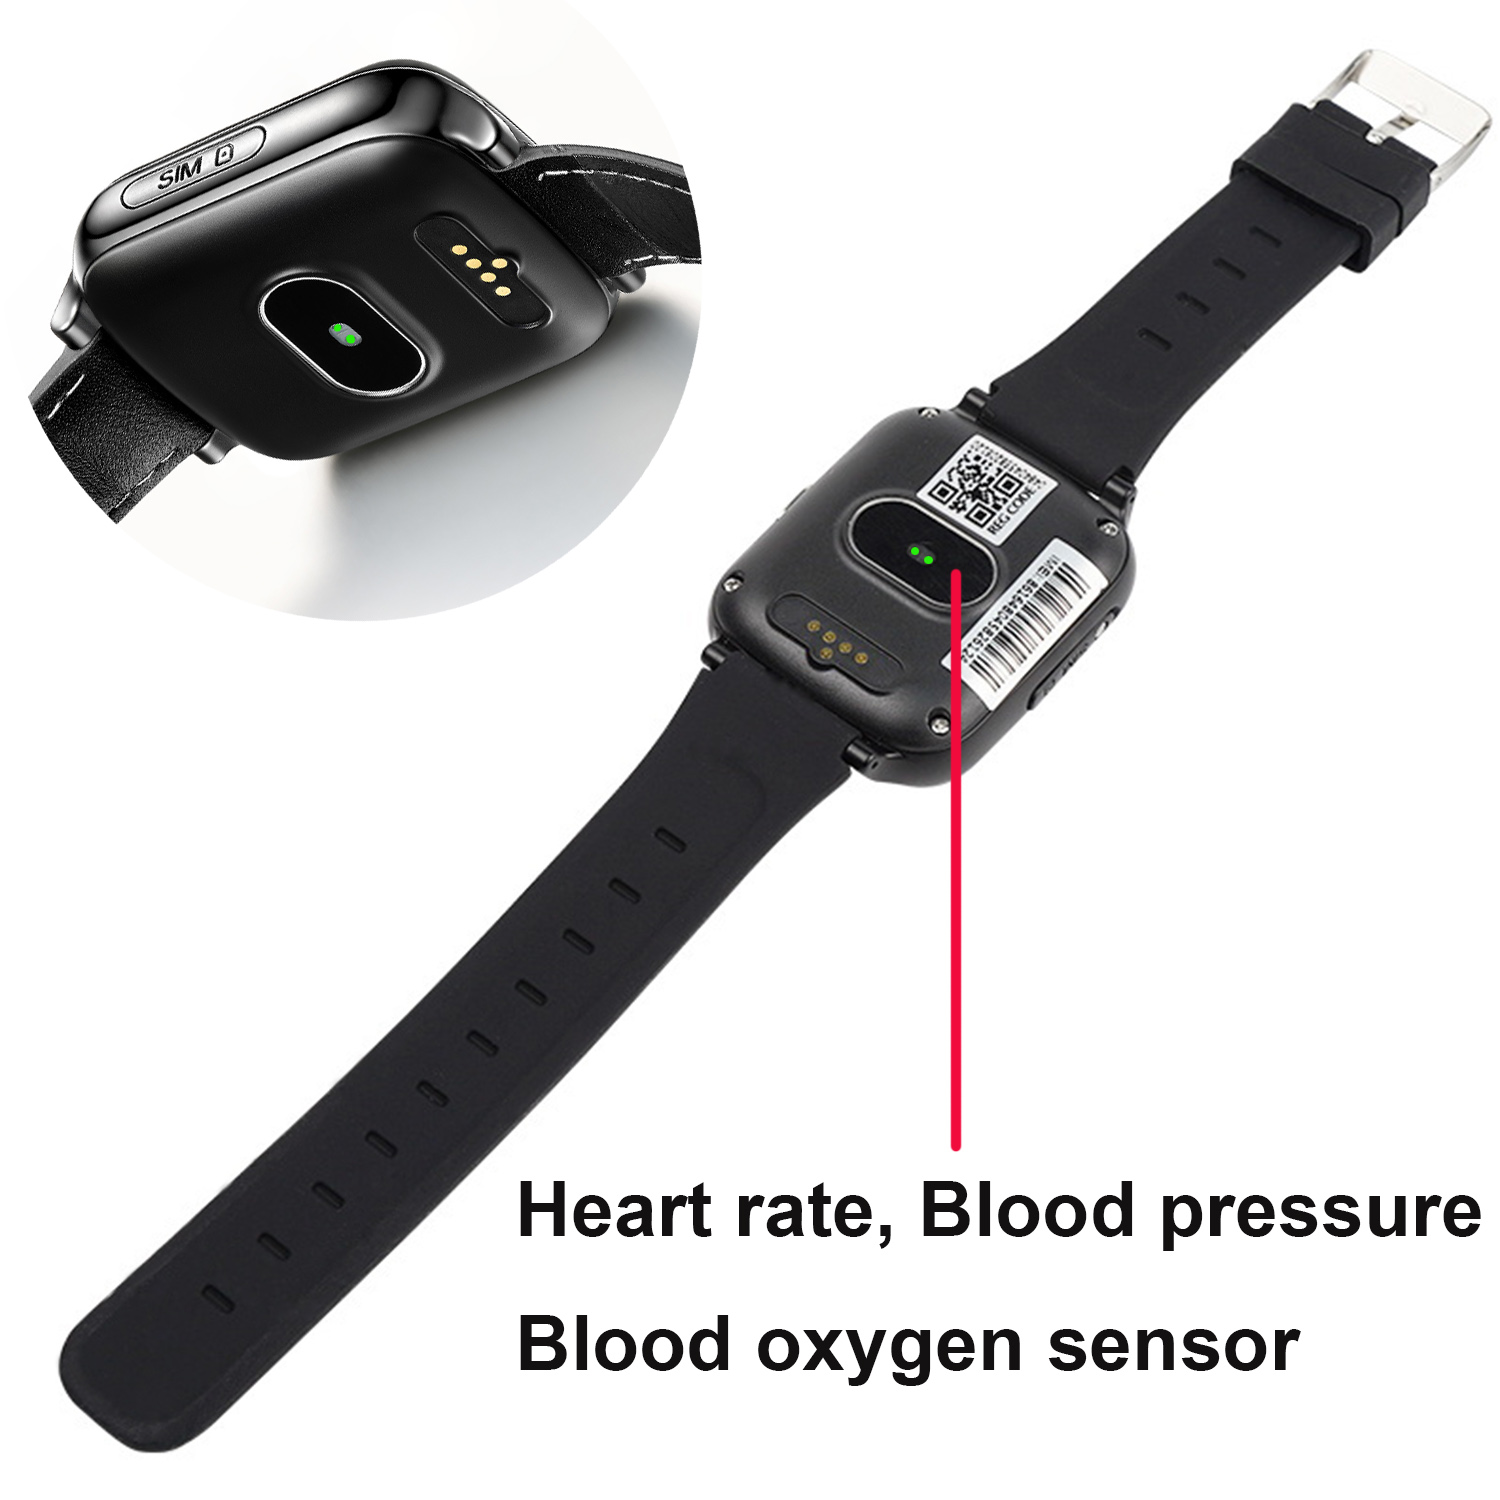 4G LTE high quality Waterproof IP67 Senior healthcare fall Down detection safety GPS Tracker Watch with Video Call heart rate blood pressure D45